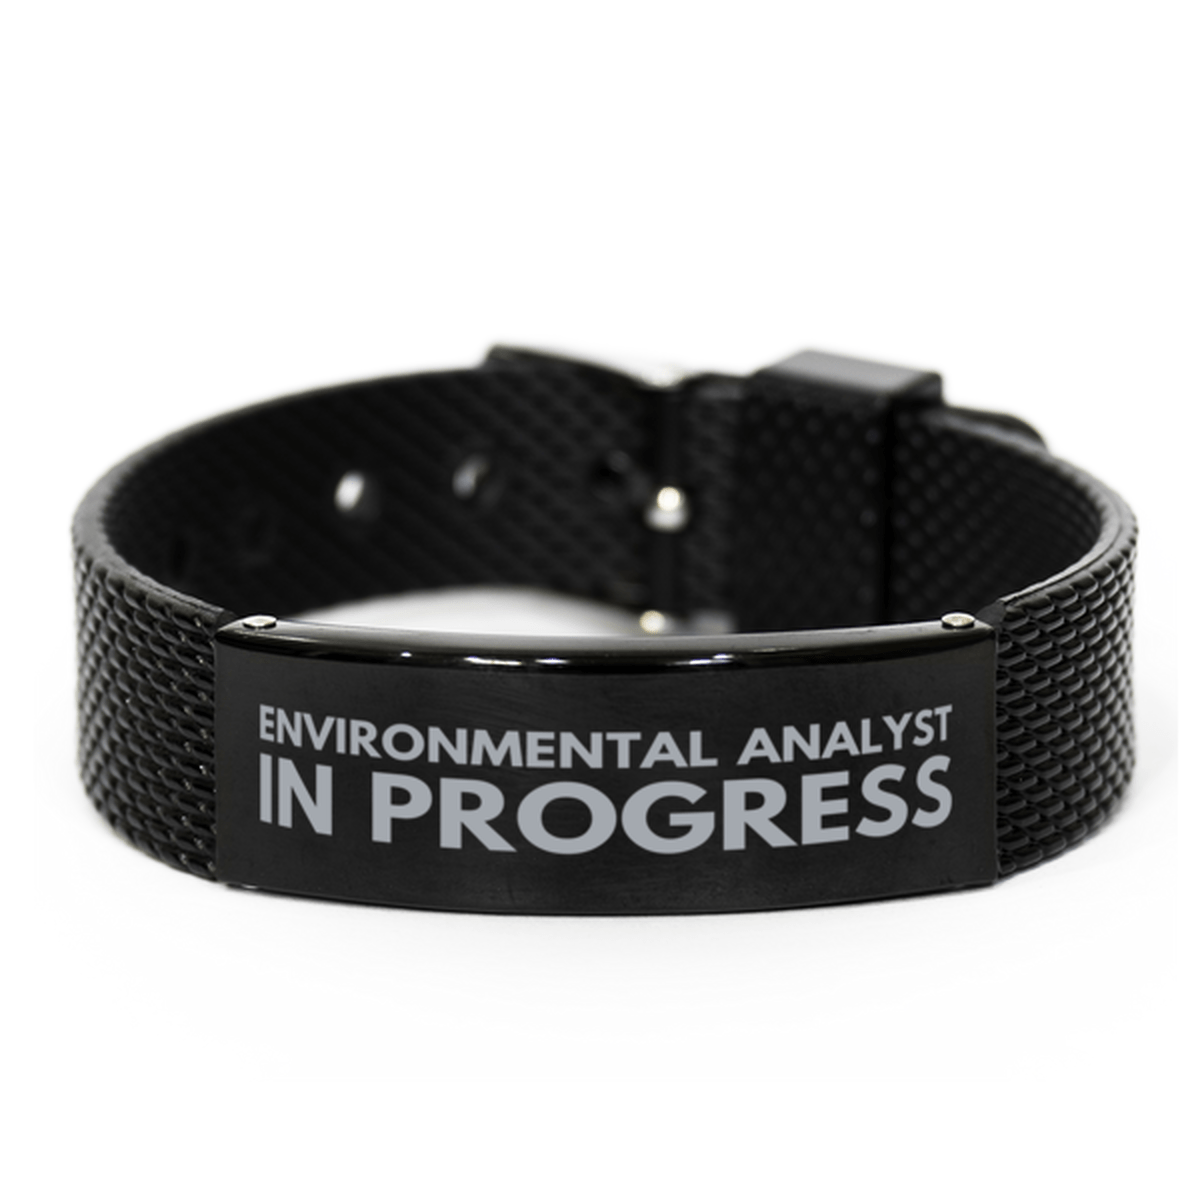 Inspirational Environmental Analyst Black Shark Mesh Bracelet, Environmental Analyst In Progress, Best Graduation Gifts for Students